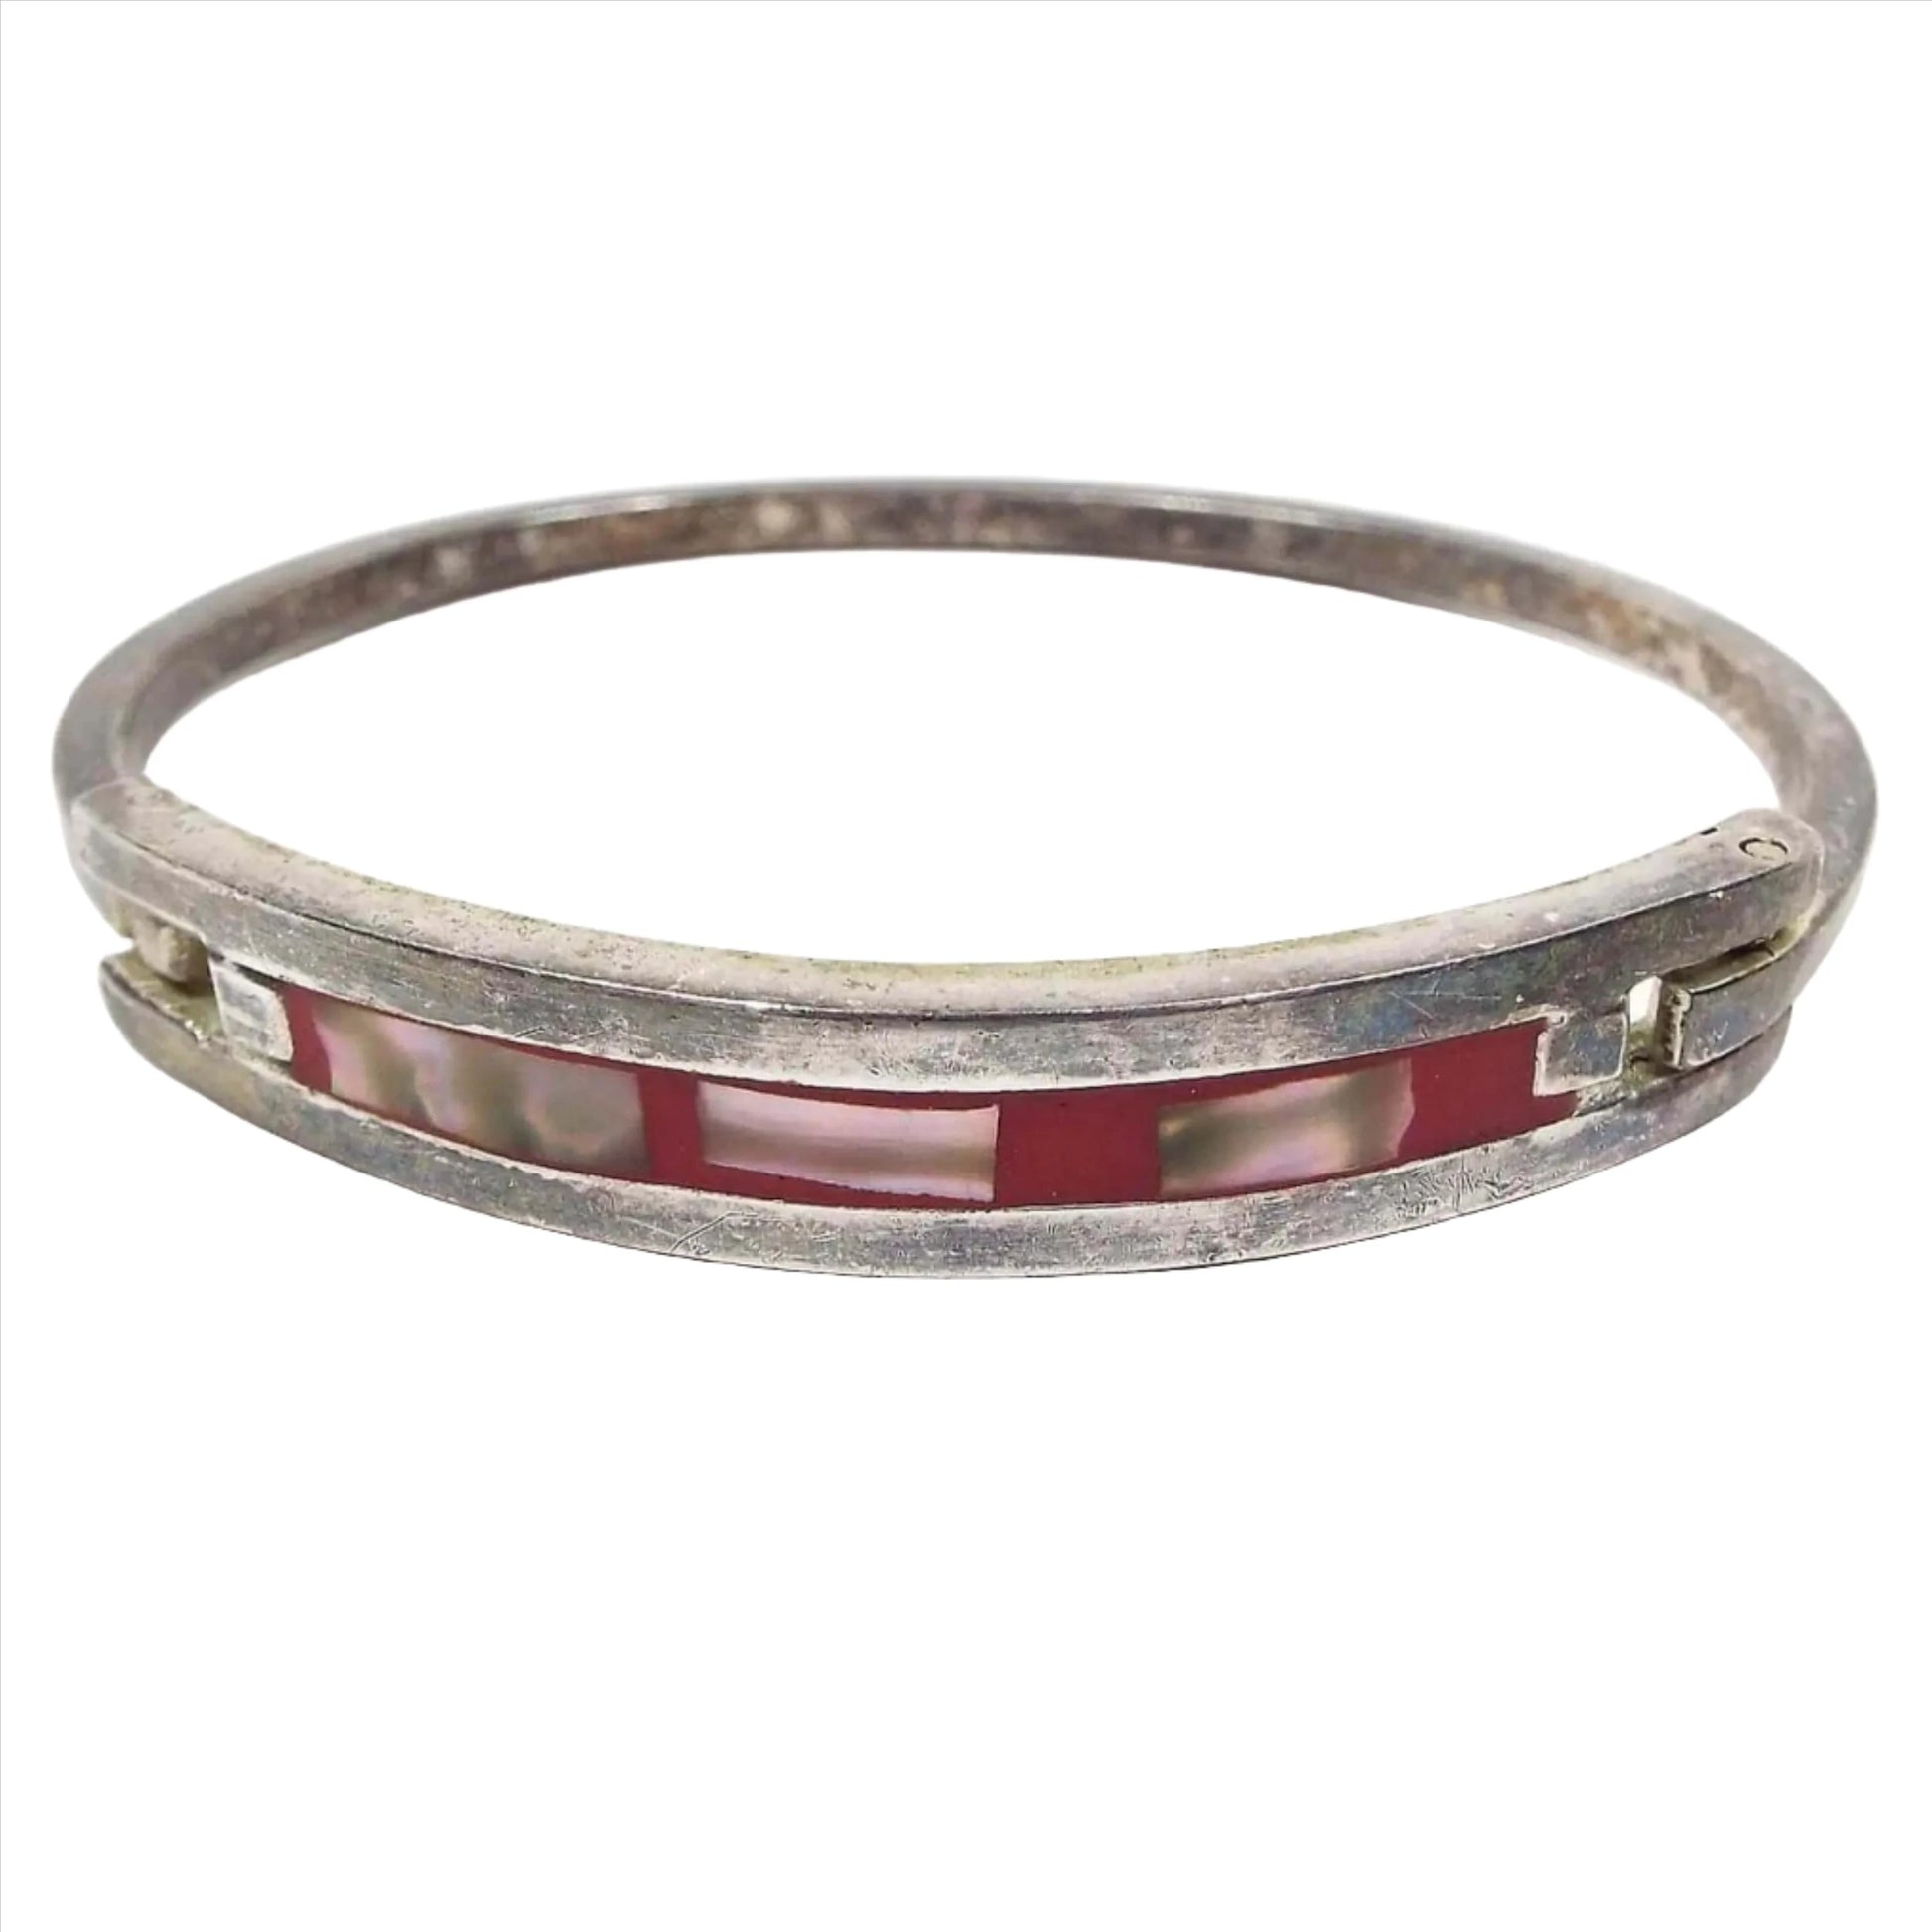 Front view of the retro vintage Mexican hinged bangle bracelet. The front has a channel with red enamel and free form style rectangle shaped pieces of inlaid abalone shell. the metal is darkened silver in color from age.